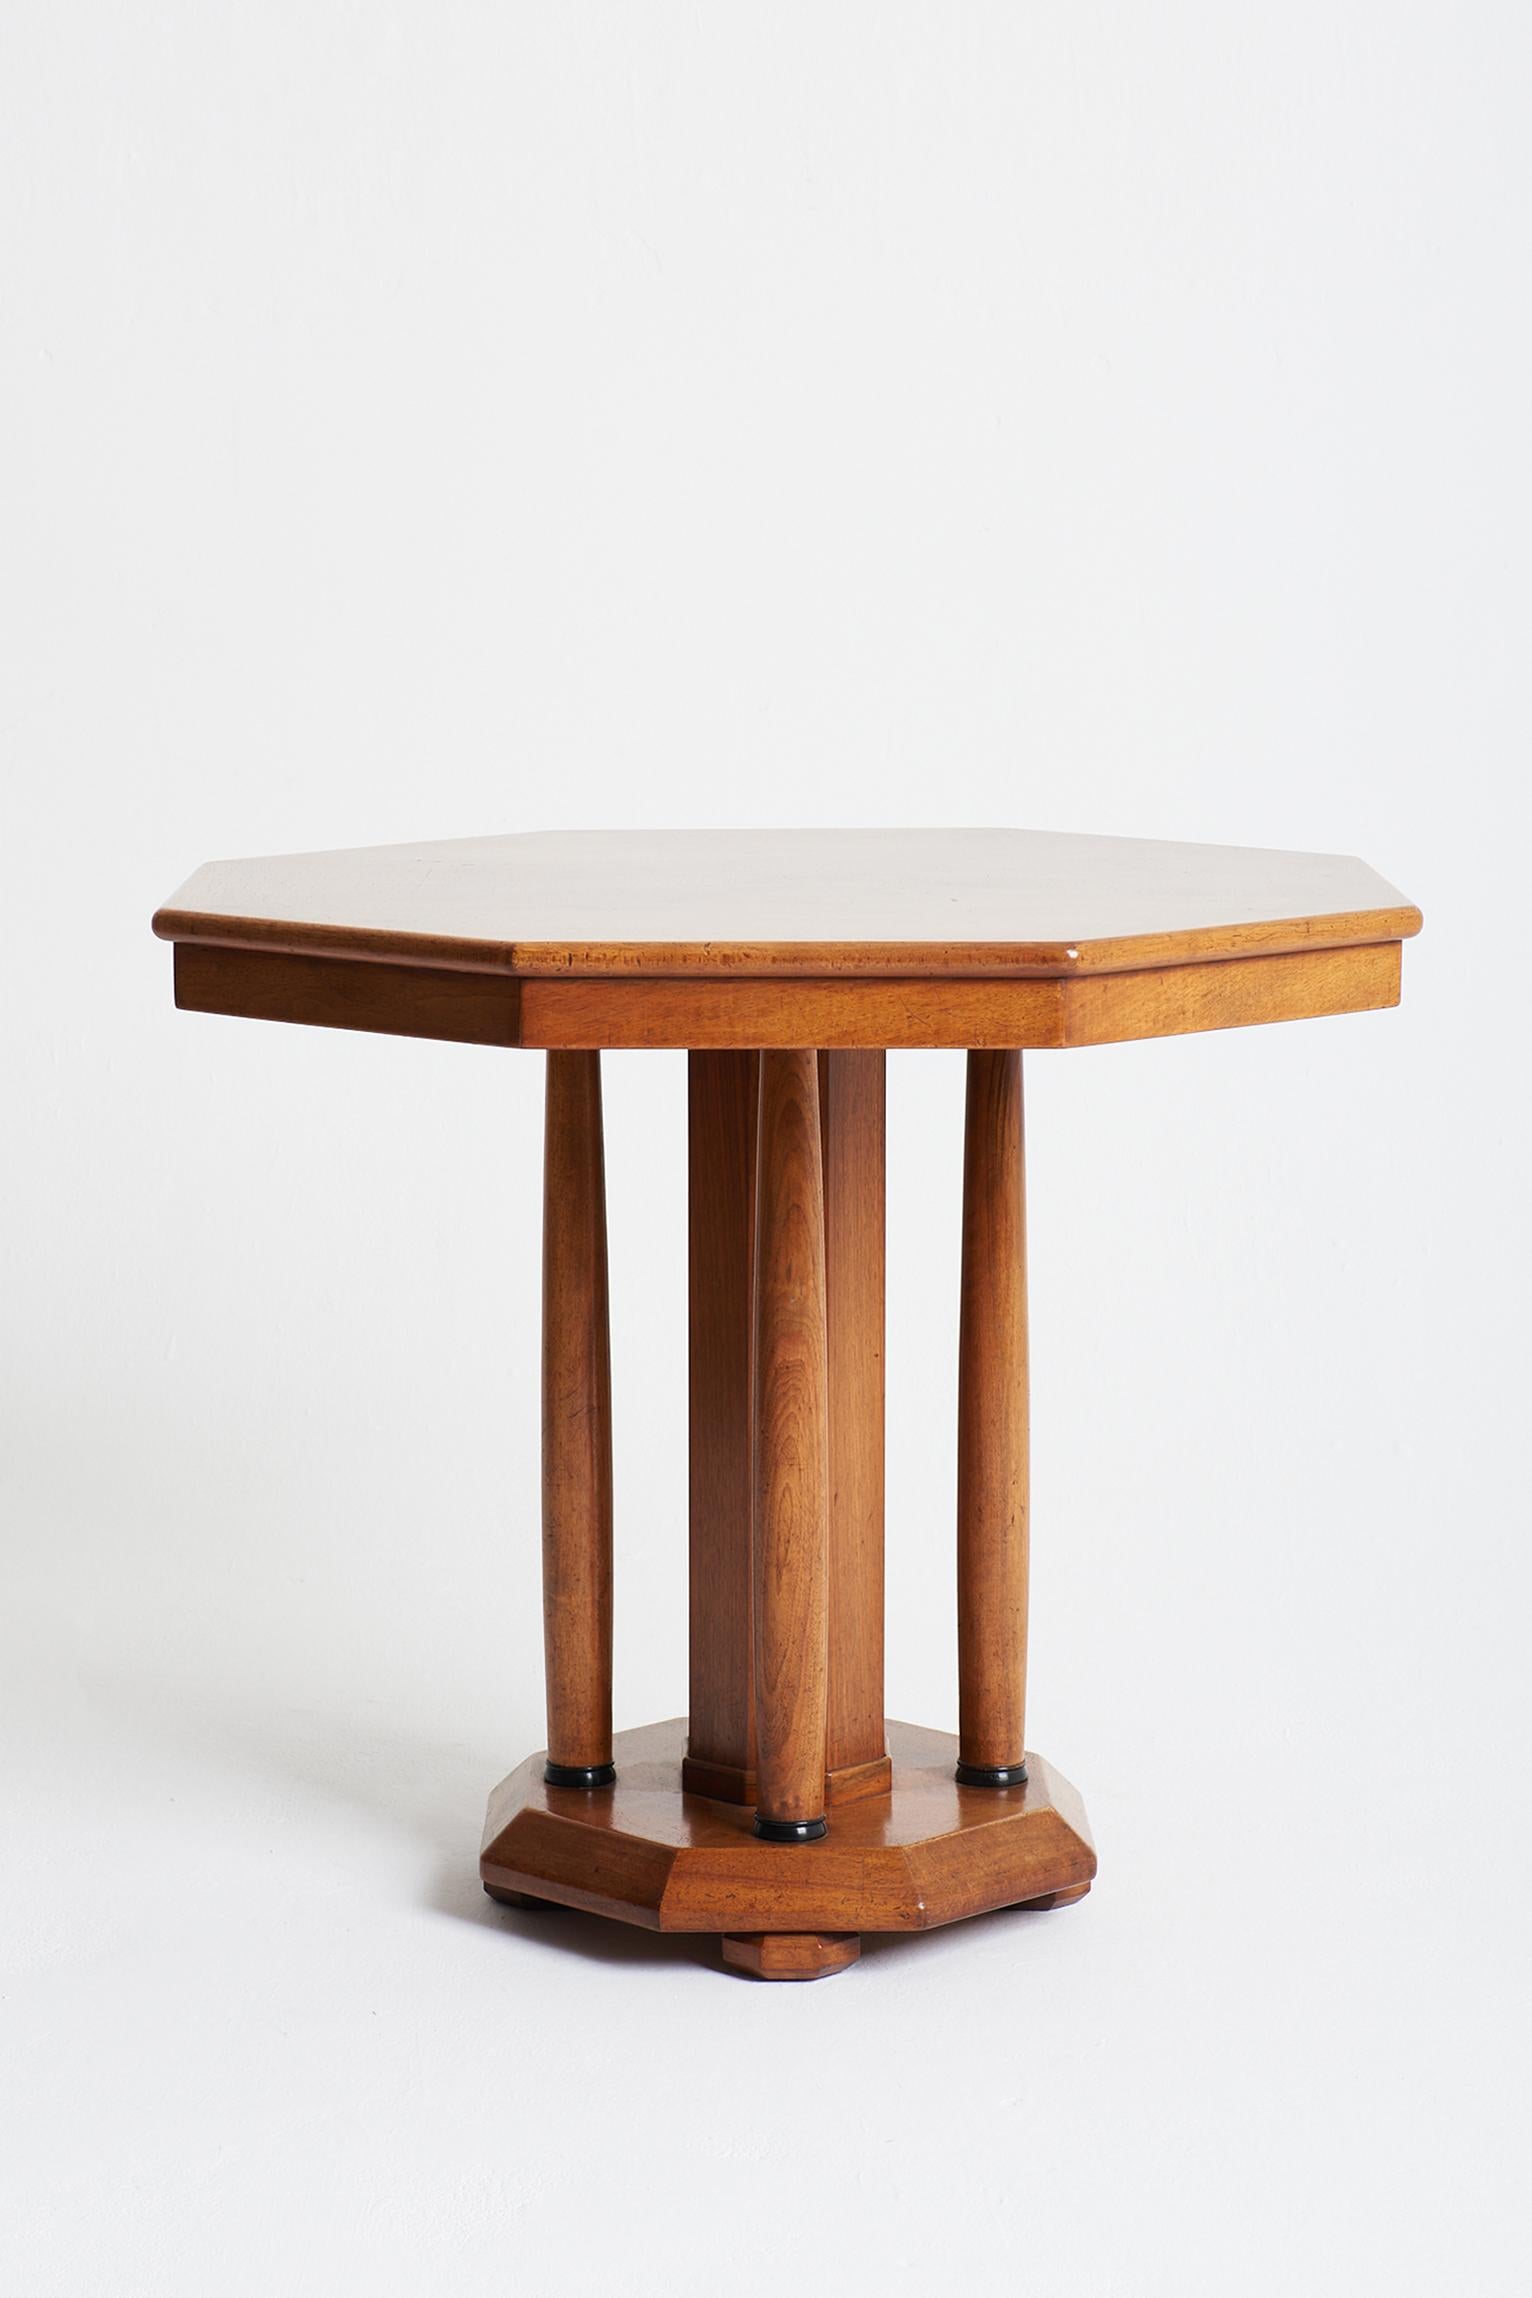 A large Art Deco octagonal mahogany centre table, the fine 'sunburst' veneered top supported by an octagonal pillar surrounded by tapered columns, on a bevelled octagonal base resting on faceted octagonal bun feet.
France, Circa 1930.